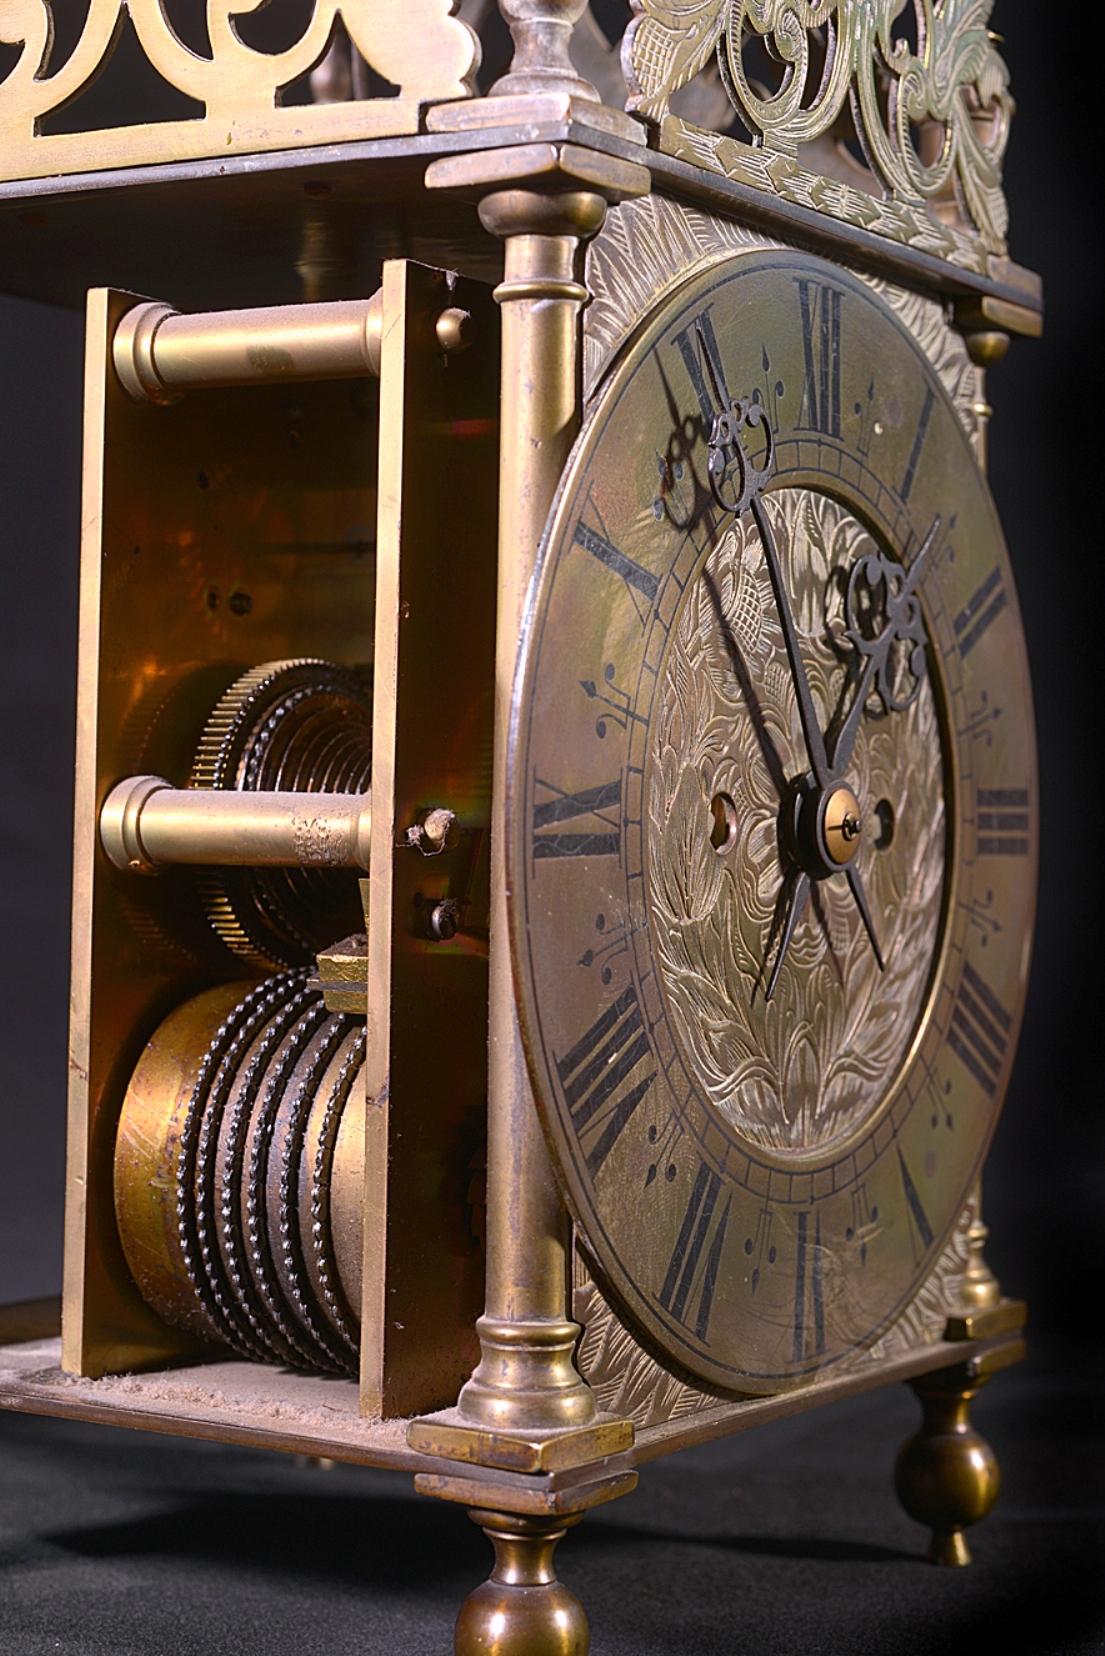 Late 19th Century Mid-19th Century Eight Day Lantern Clock with a Double Fusee Striking Movement For Sale